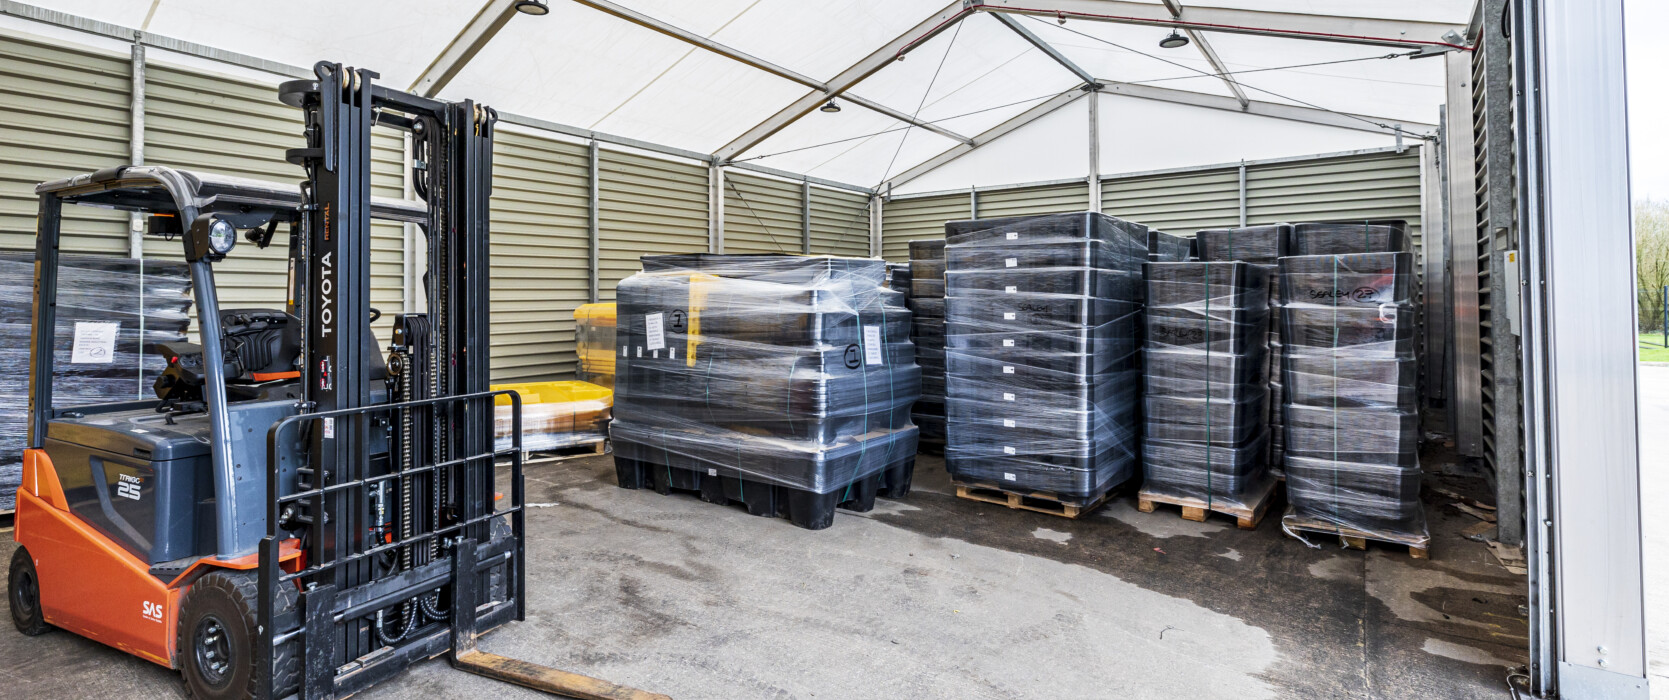 Temporary building to improve the plastic manufacturing process